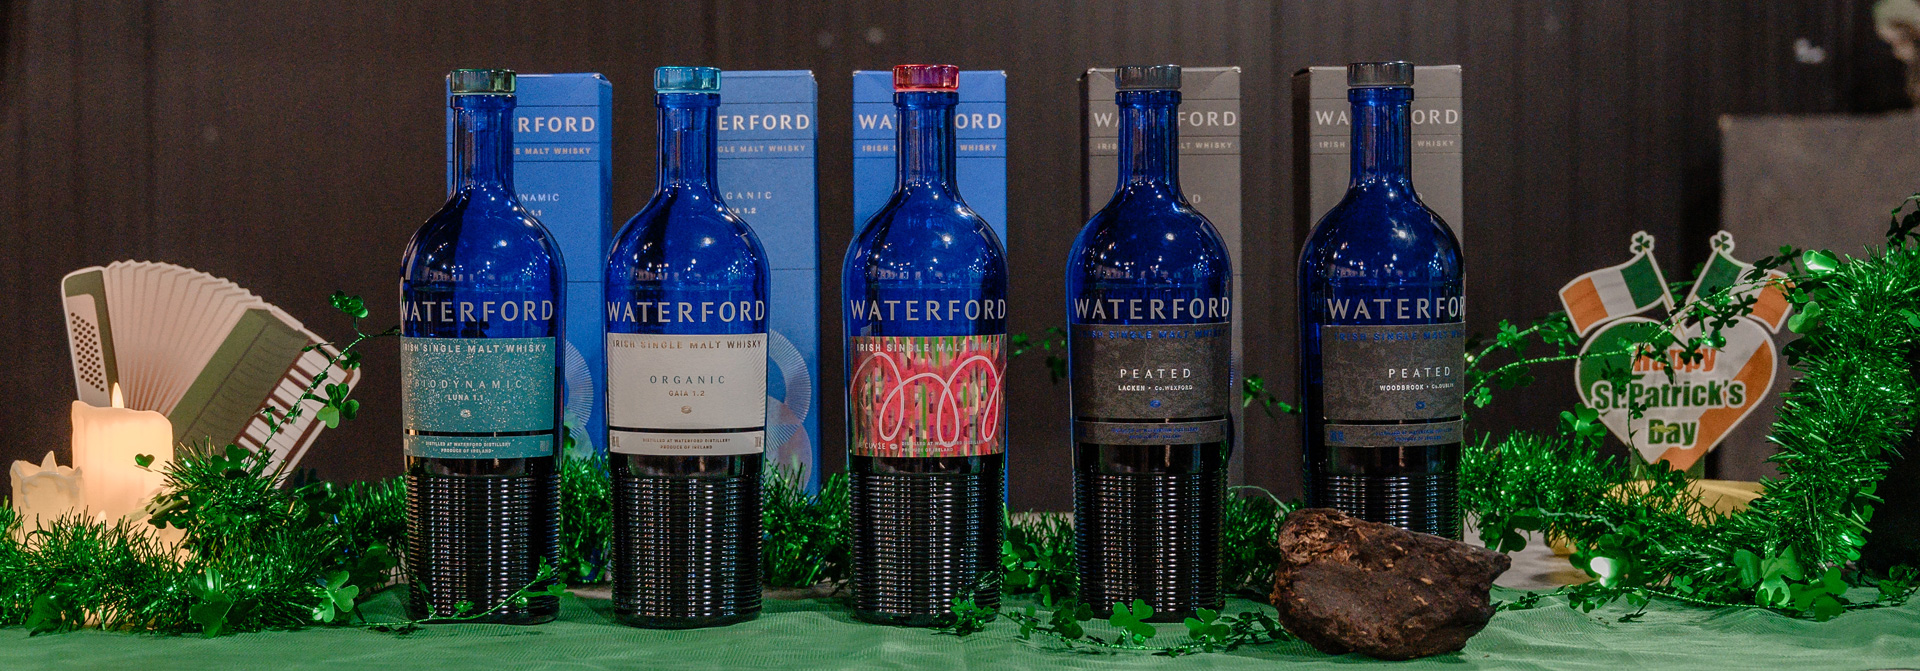 Saint Patrick’s Tasting Day #76 • The Waterford Journey